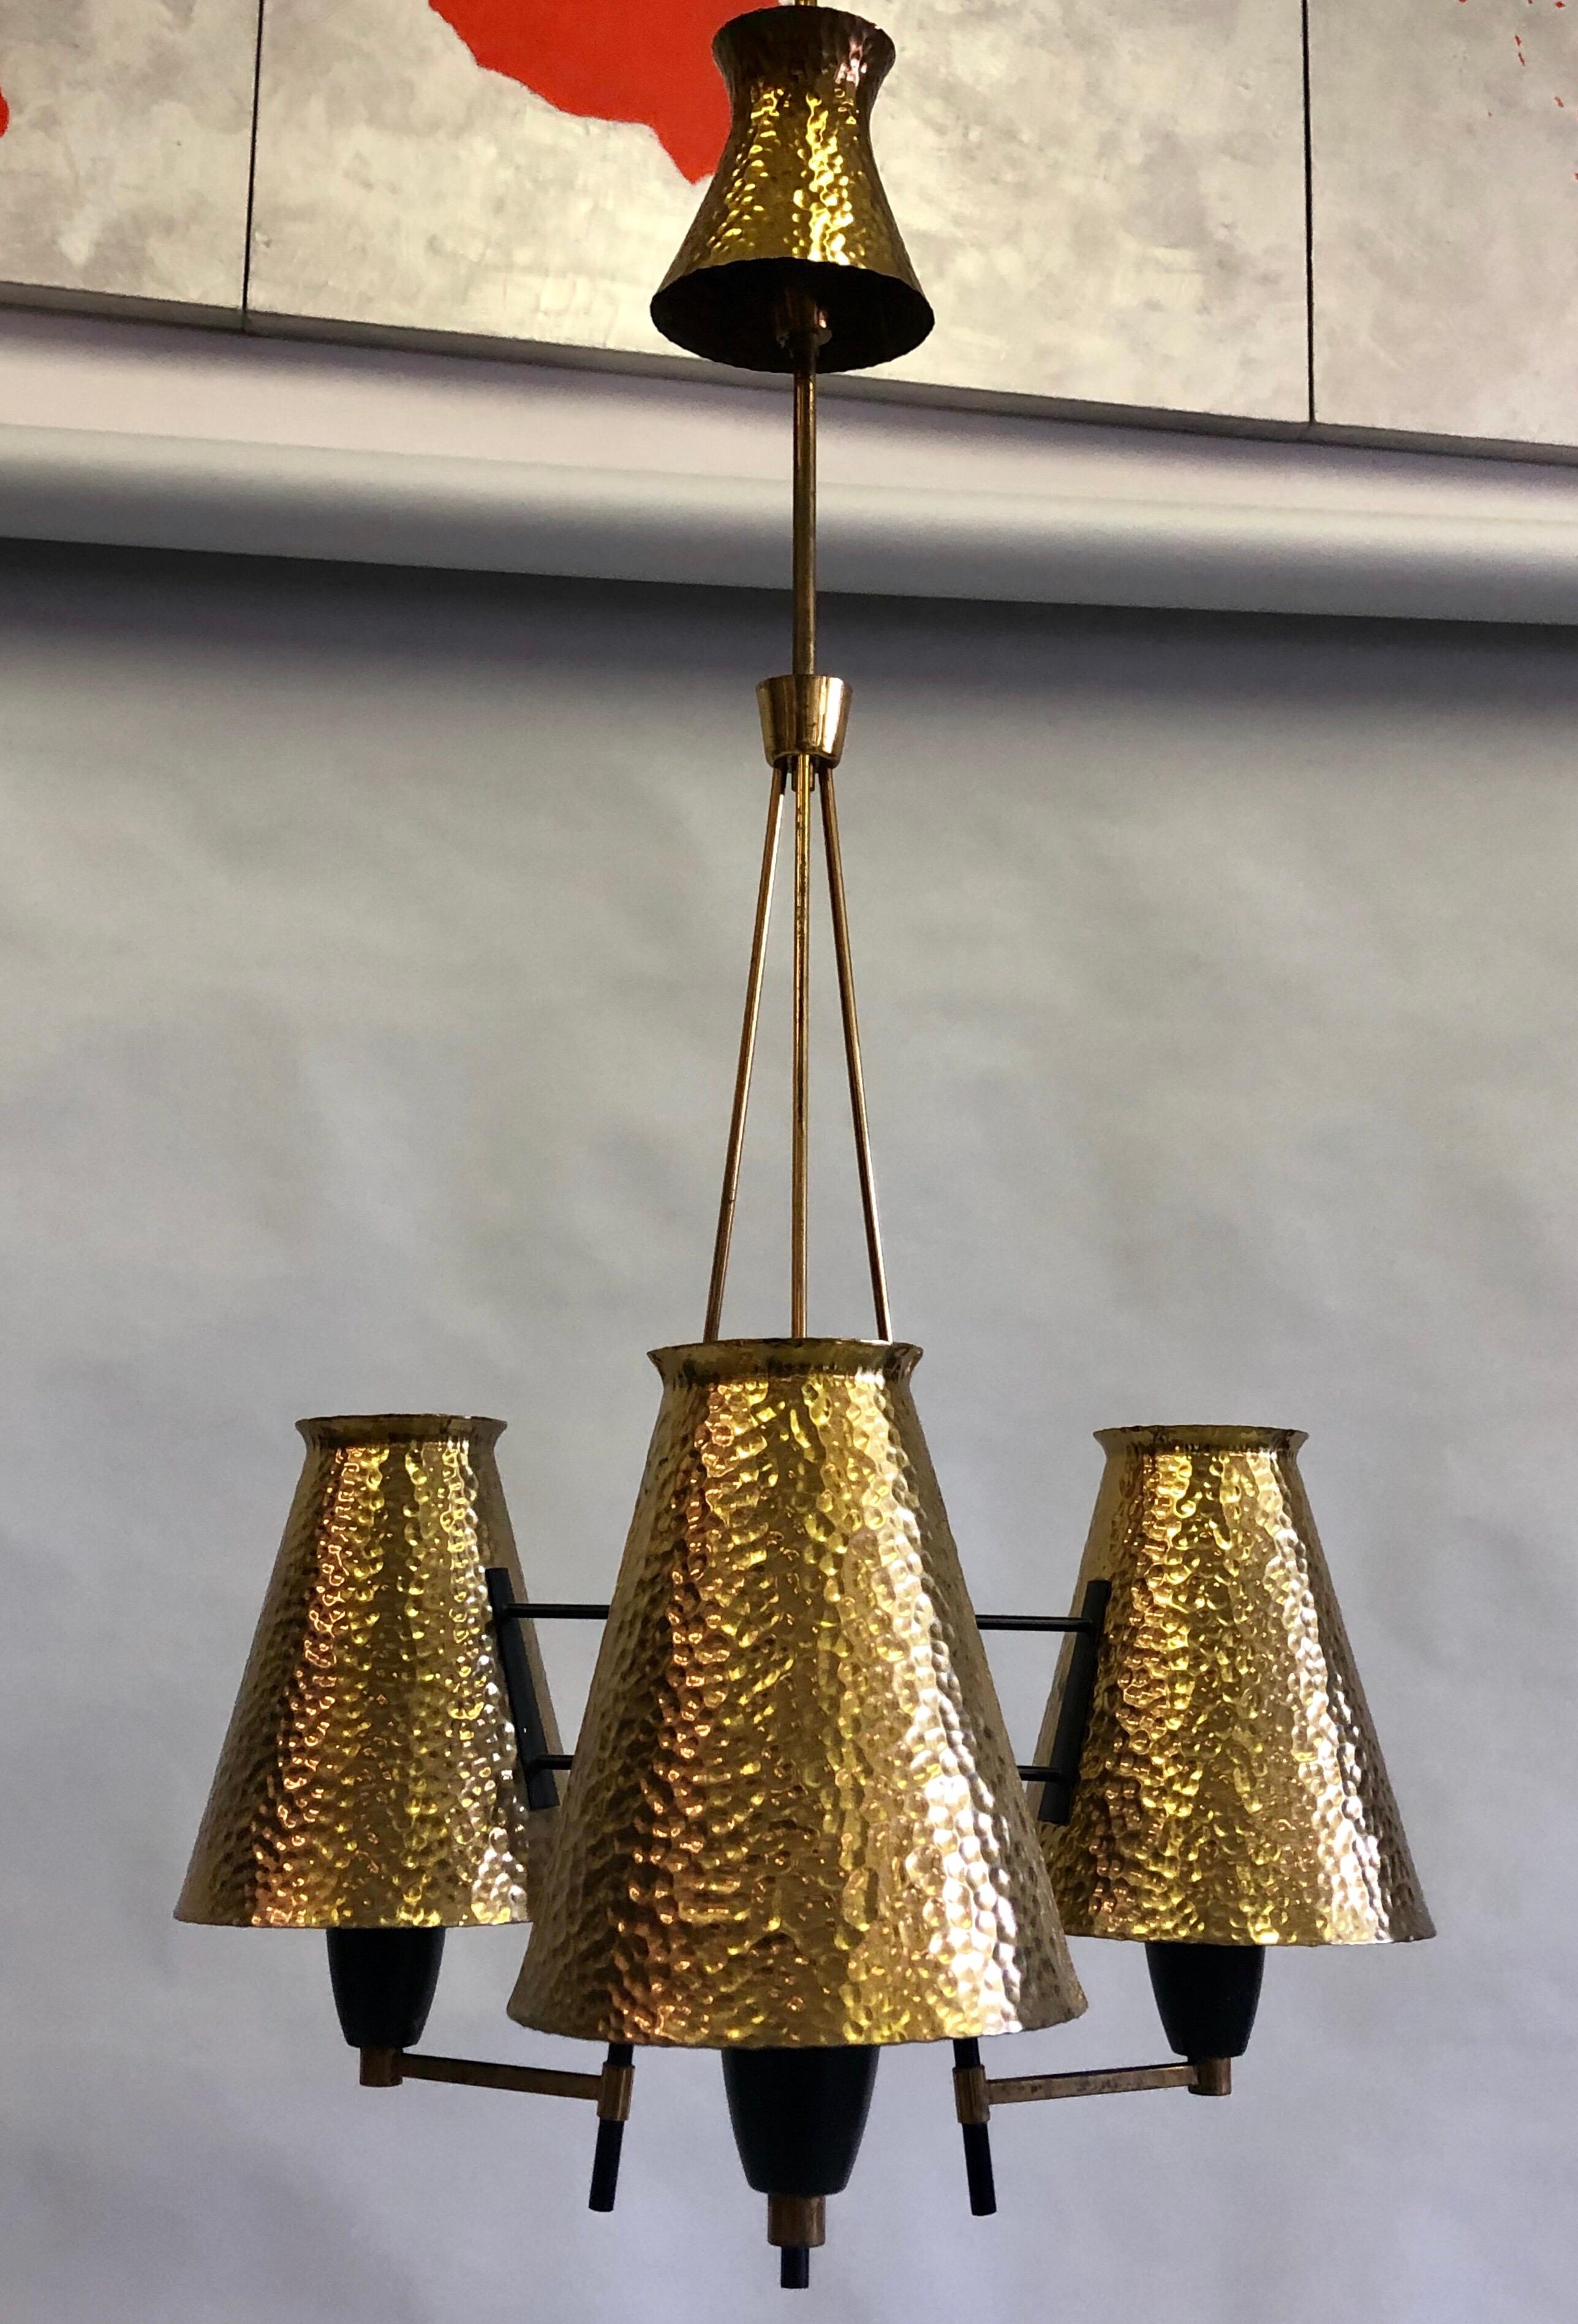 Elegant Italian Mid-Century Modern black enameled metal and hammered brass chandelier by Stilnovo, circa 1948. The pendant features 3 hand-hammered brass reflectors / shades and canopy arranged around a brass and black enameled metal frame. Each